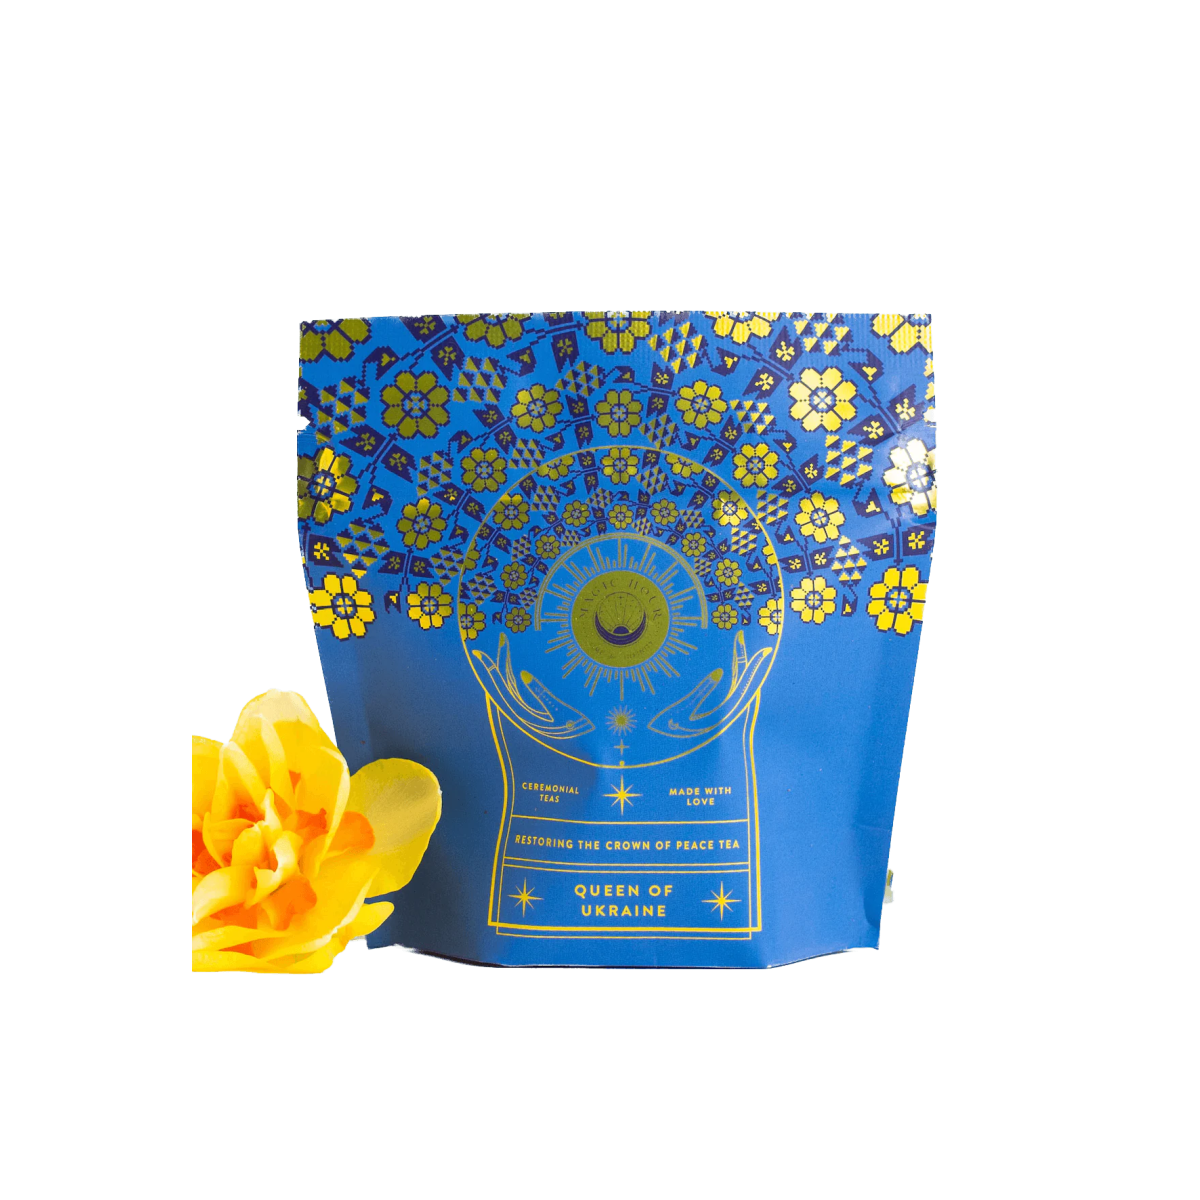 A blue and gold ornate tea packaging labeled "Rest, Relaxation & Sleep Sampler Set" is displayed, featuring a mystical design with floral and celestial motifs. To the left of the package, a bright yellow flower adds a vibrant touch to the composition, enhancing the allure of this Magic Hour Tea.